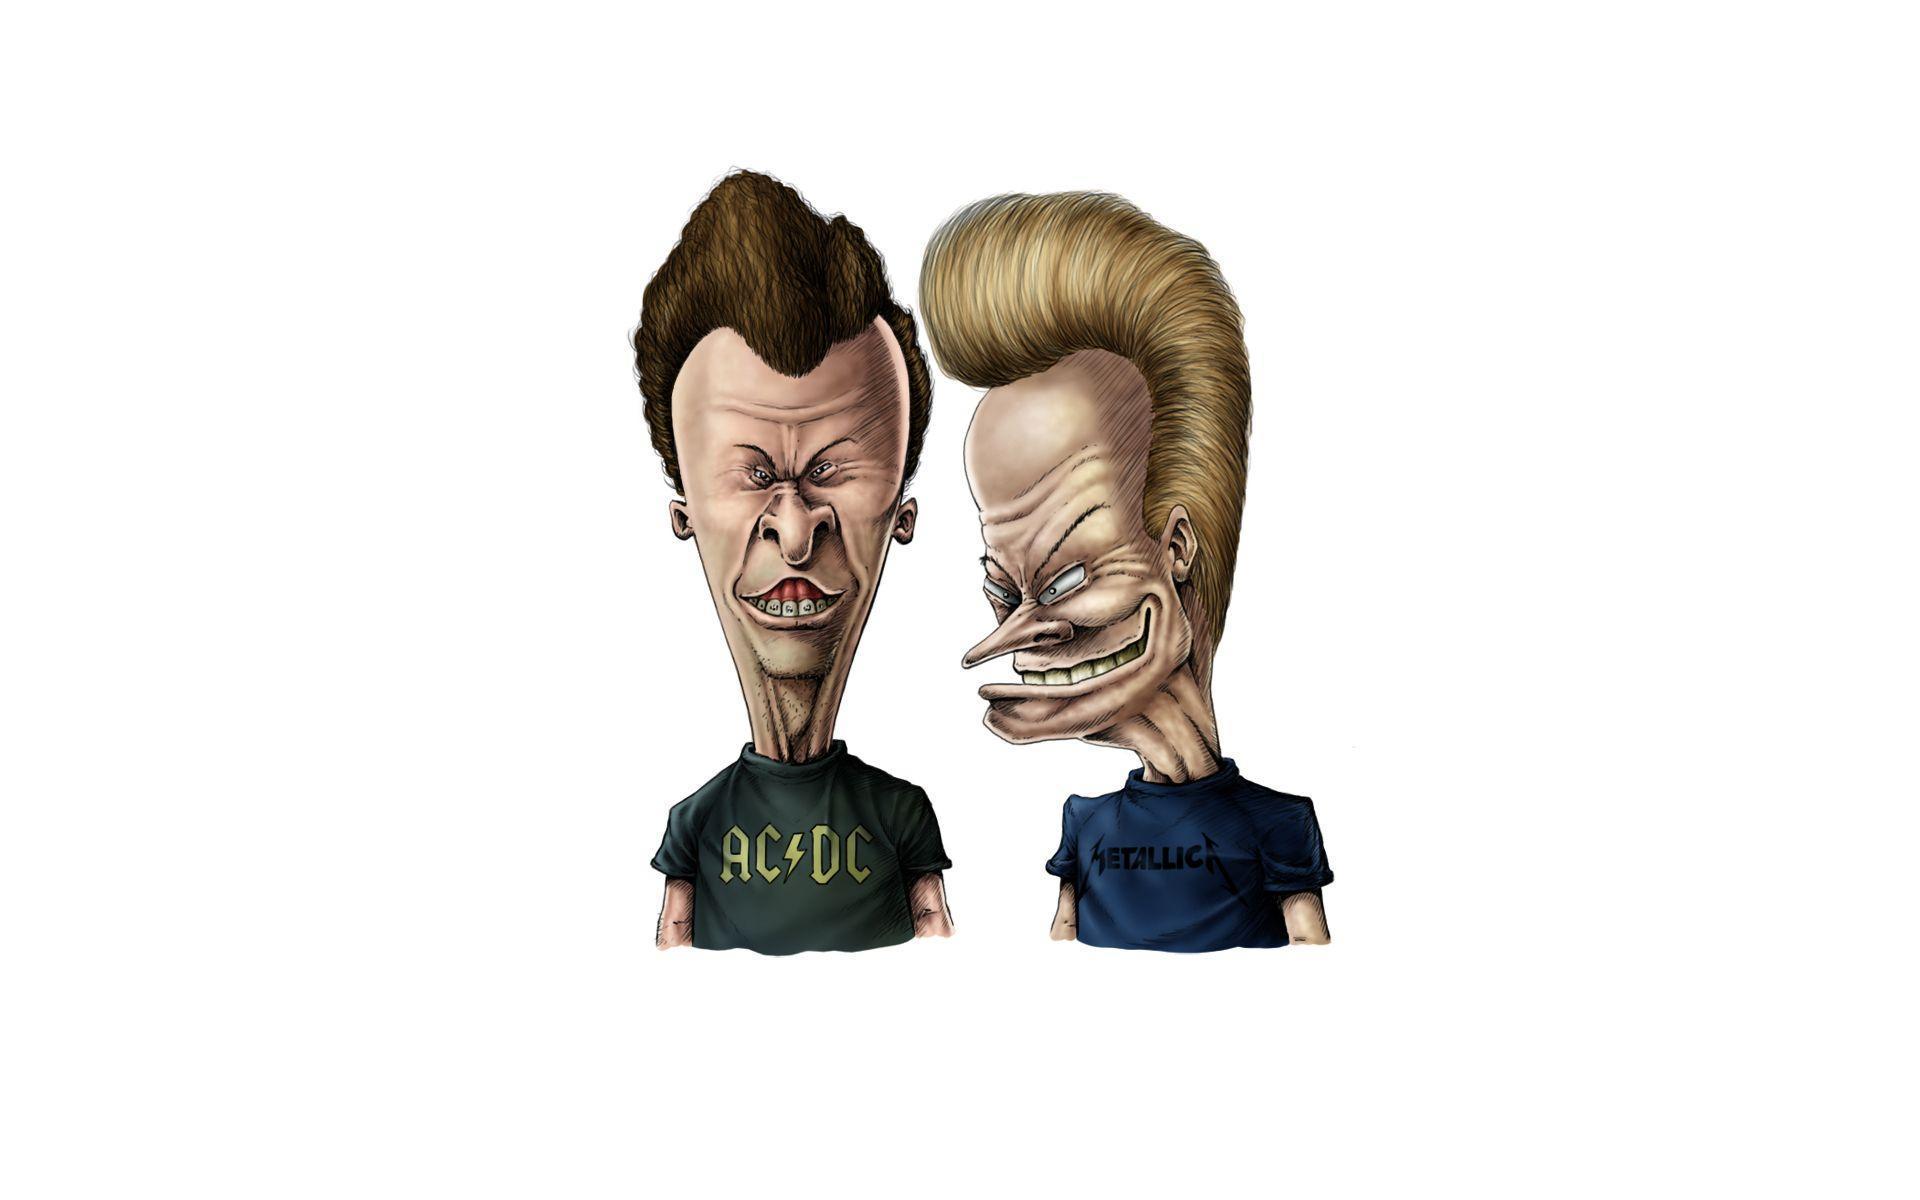 Caricature of Beavis and Butthead wallpaper and image